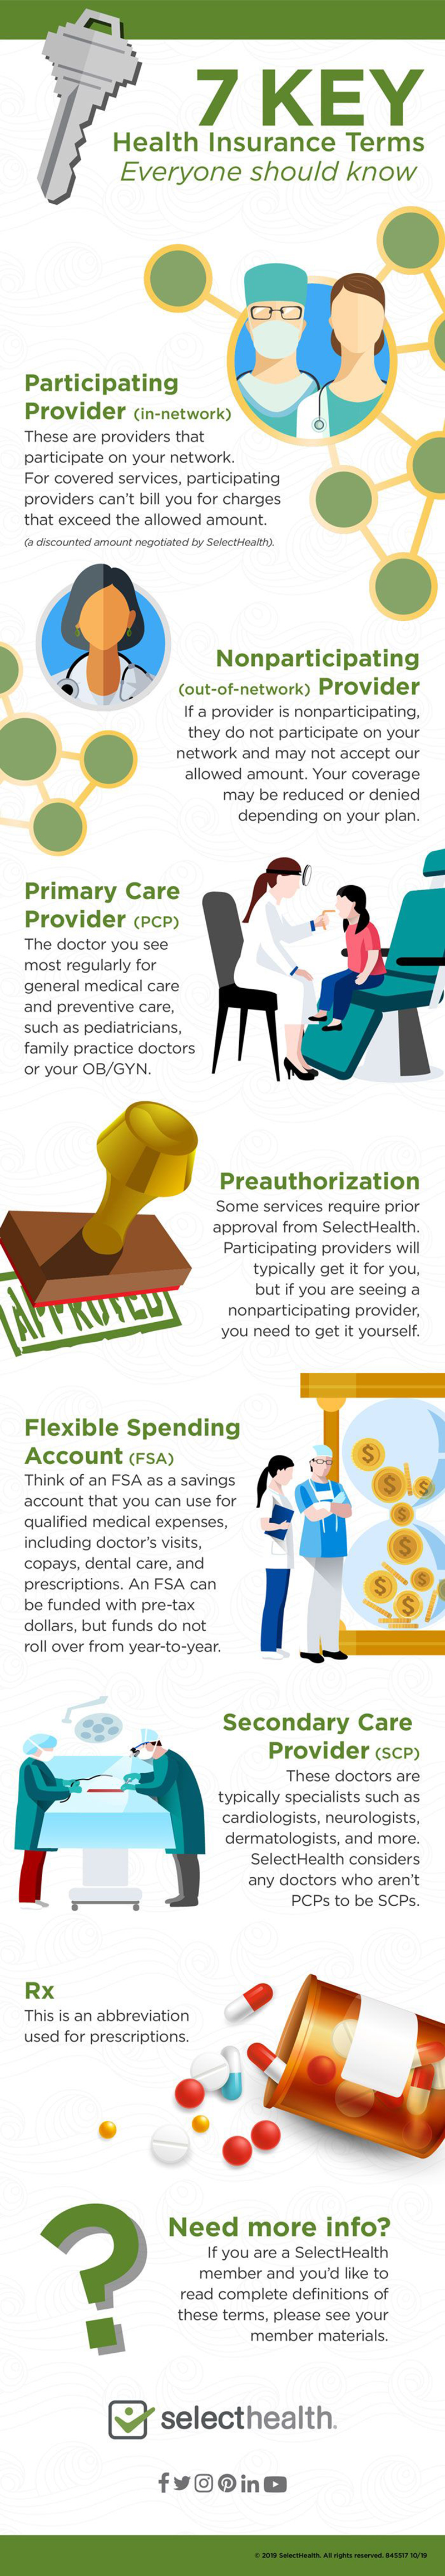 Infographic, key insurance terms everyone should know part 2